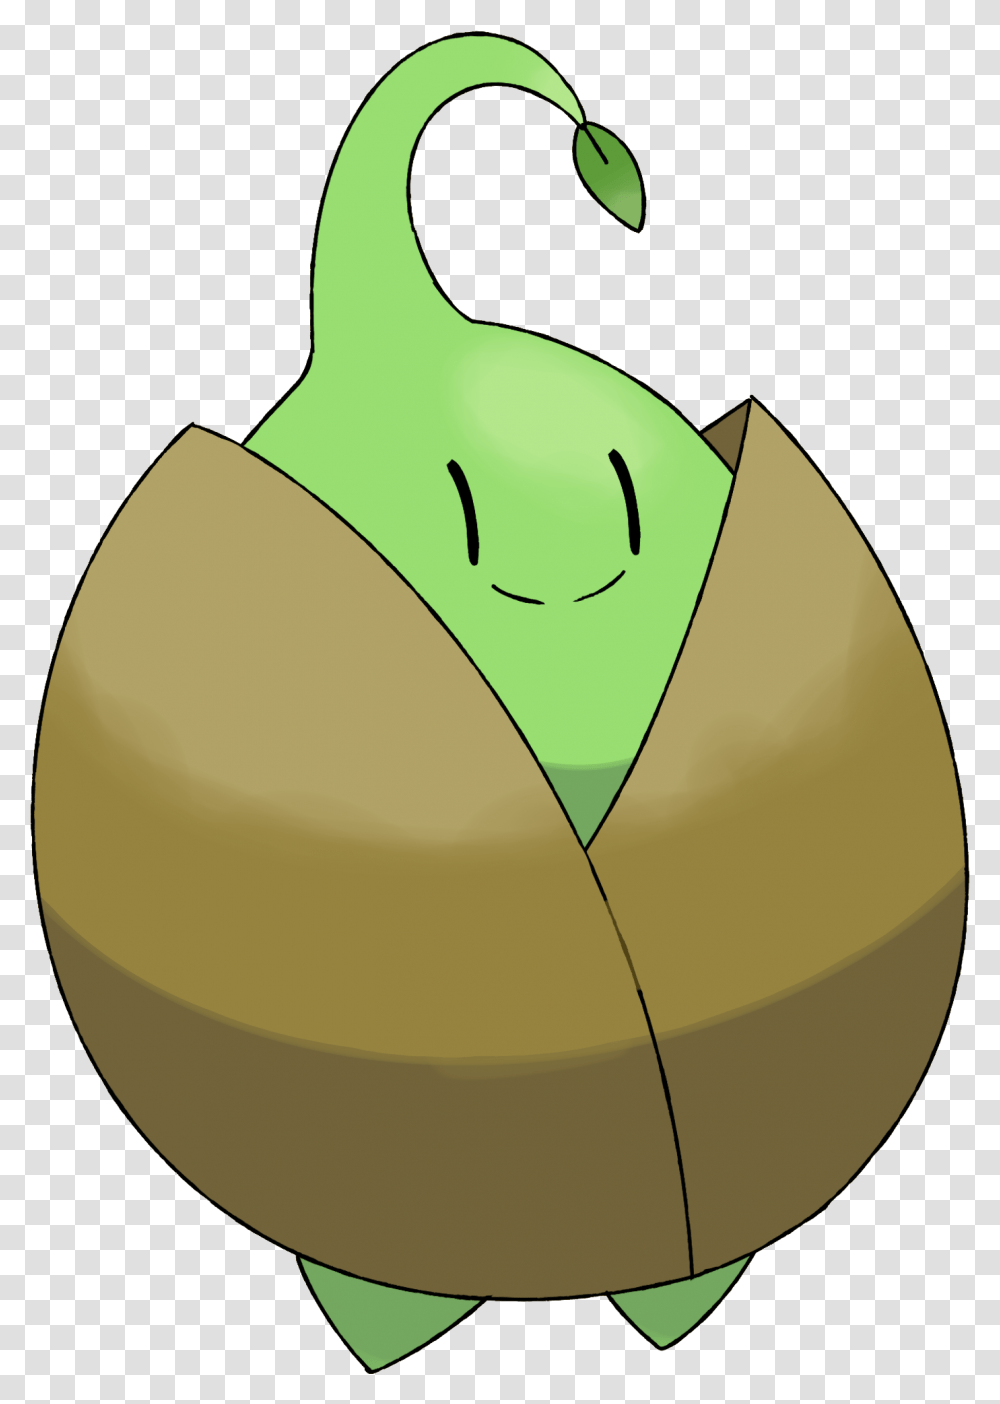 Darkandwindie Fakemon Wiki Seed Ling, Egg, Food, Sweets, Confectionery Transparent Png